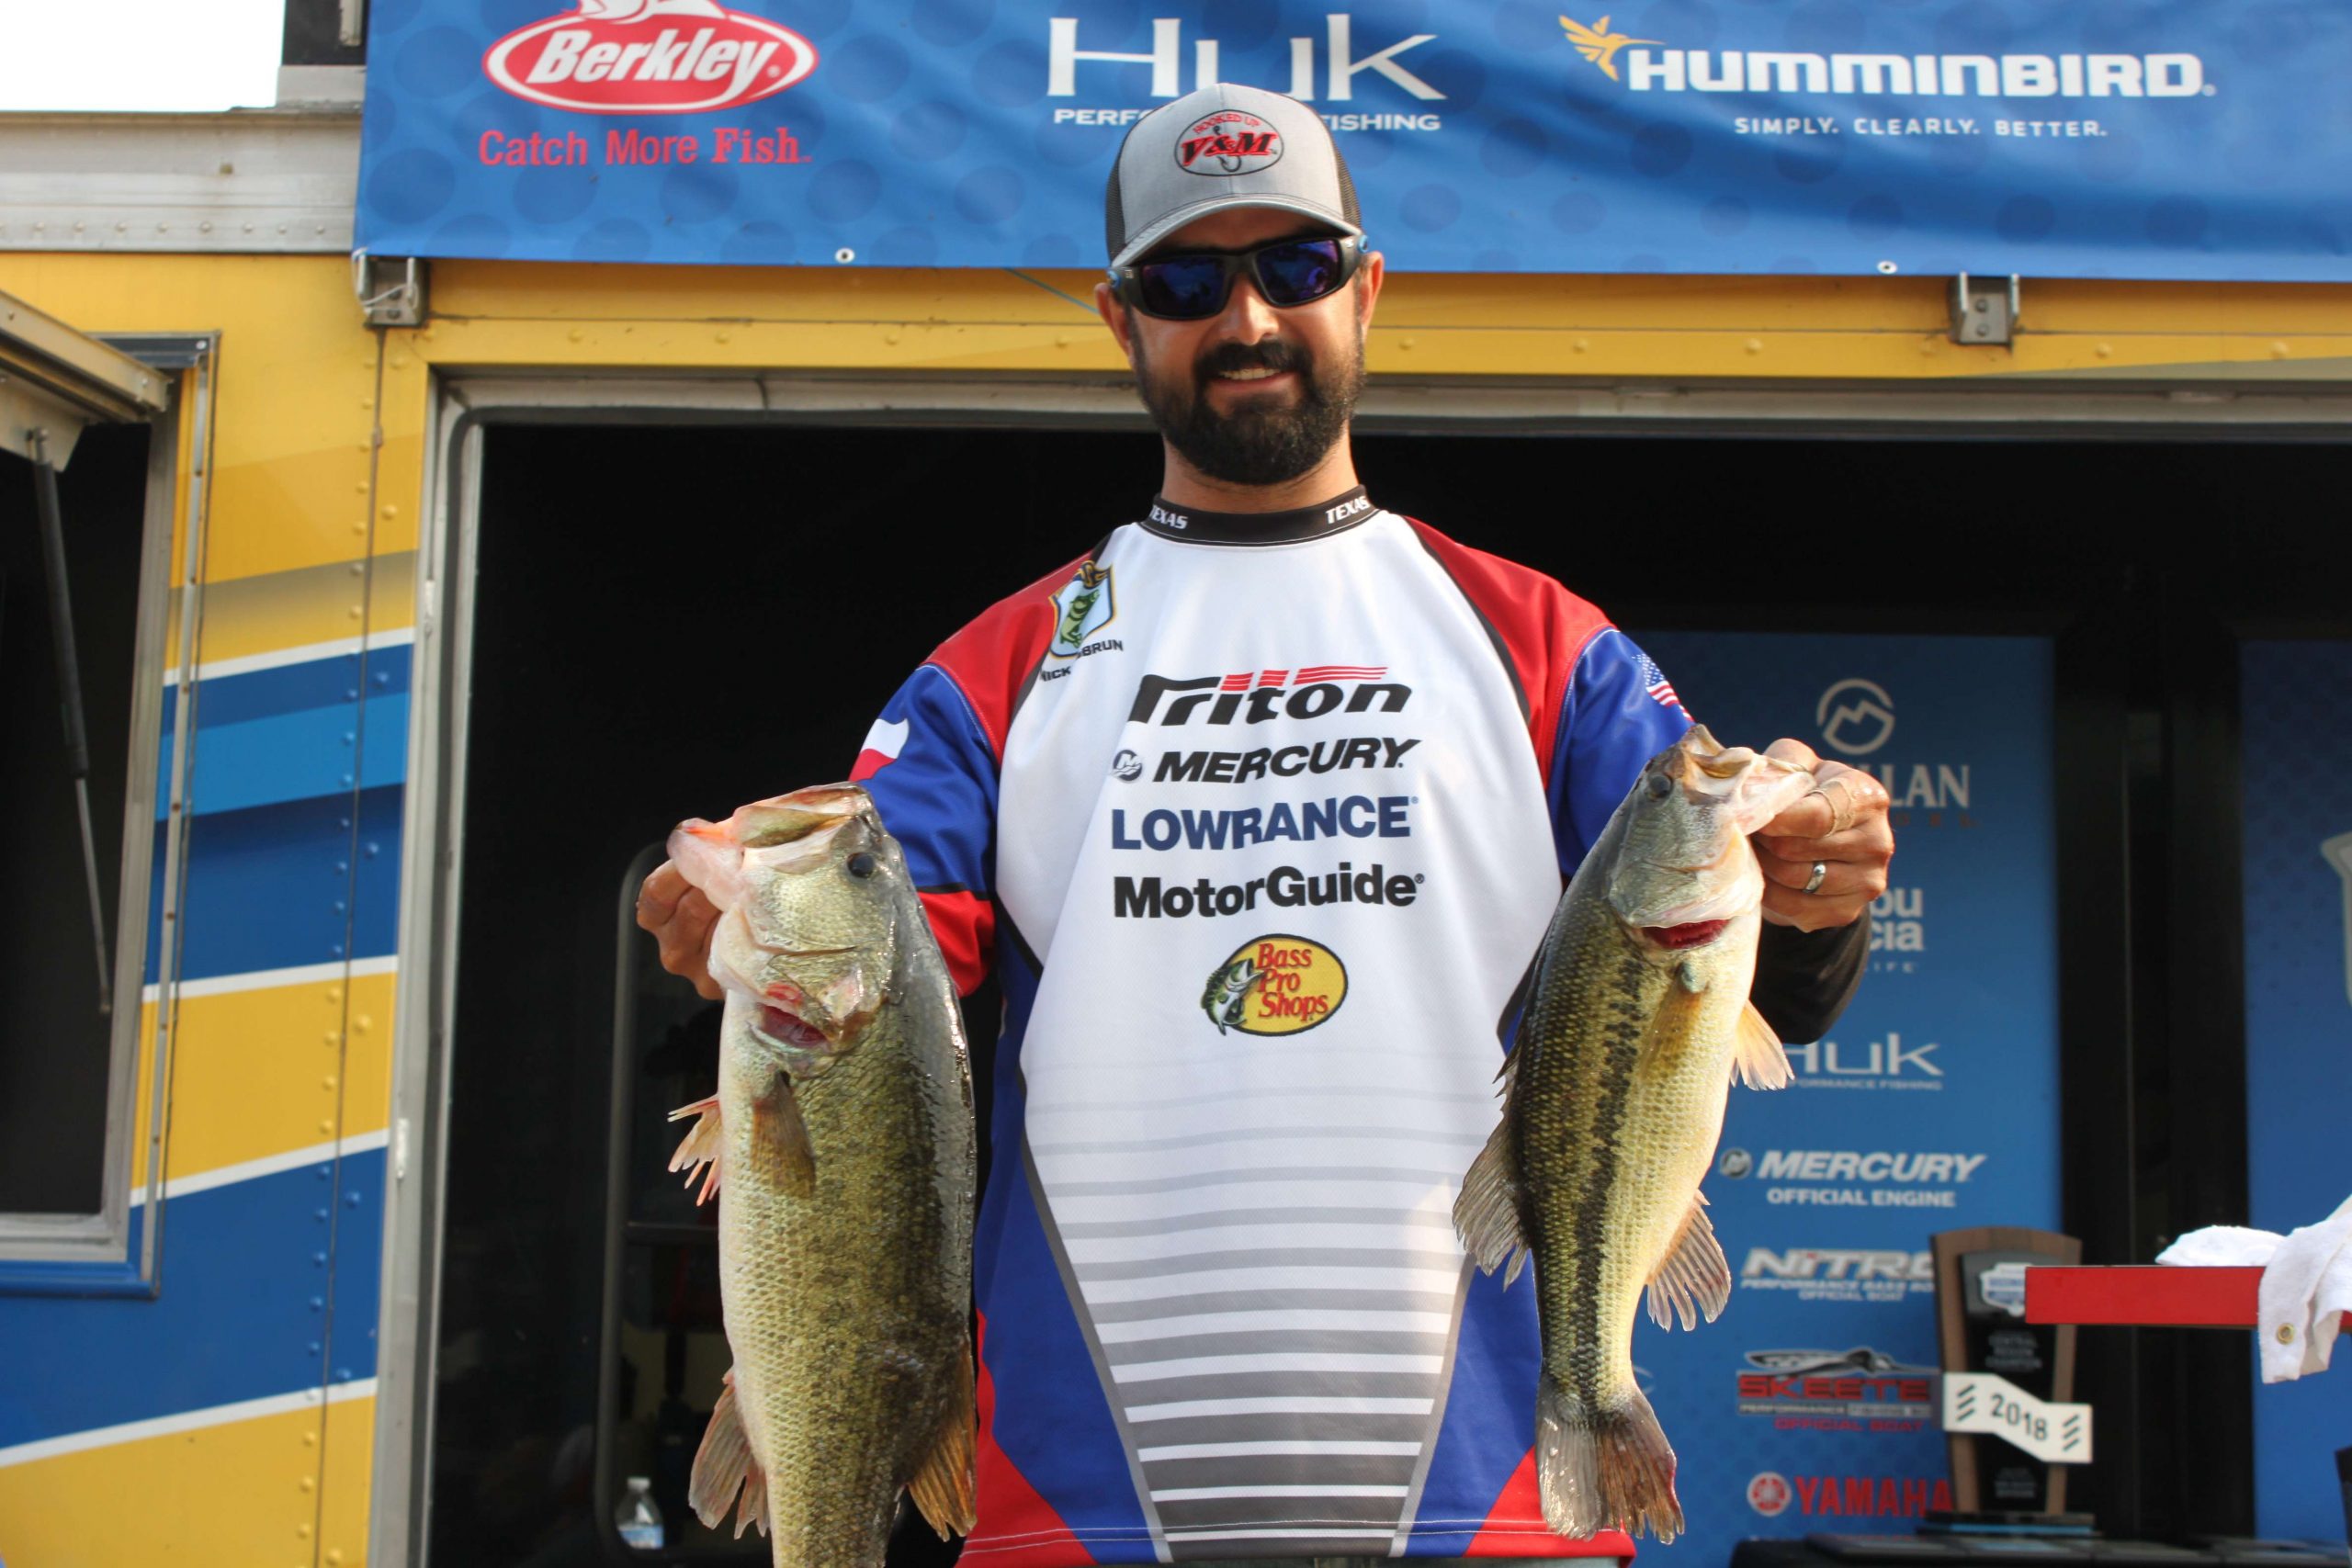 Nickolas LeBrun finished ninth overall among boaters with 46-2, but came up a few pounds short of his stateâs lead. He did collect a nice check for his effort, however.